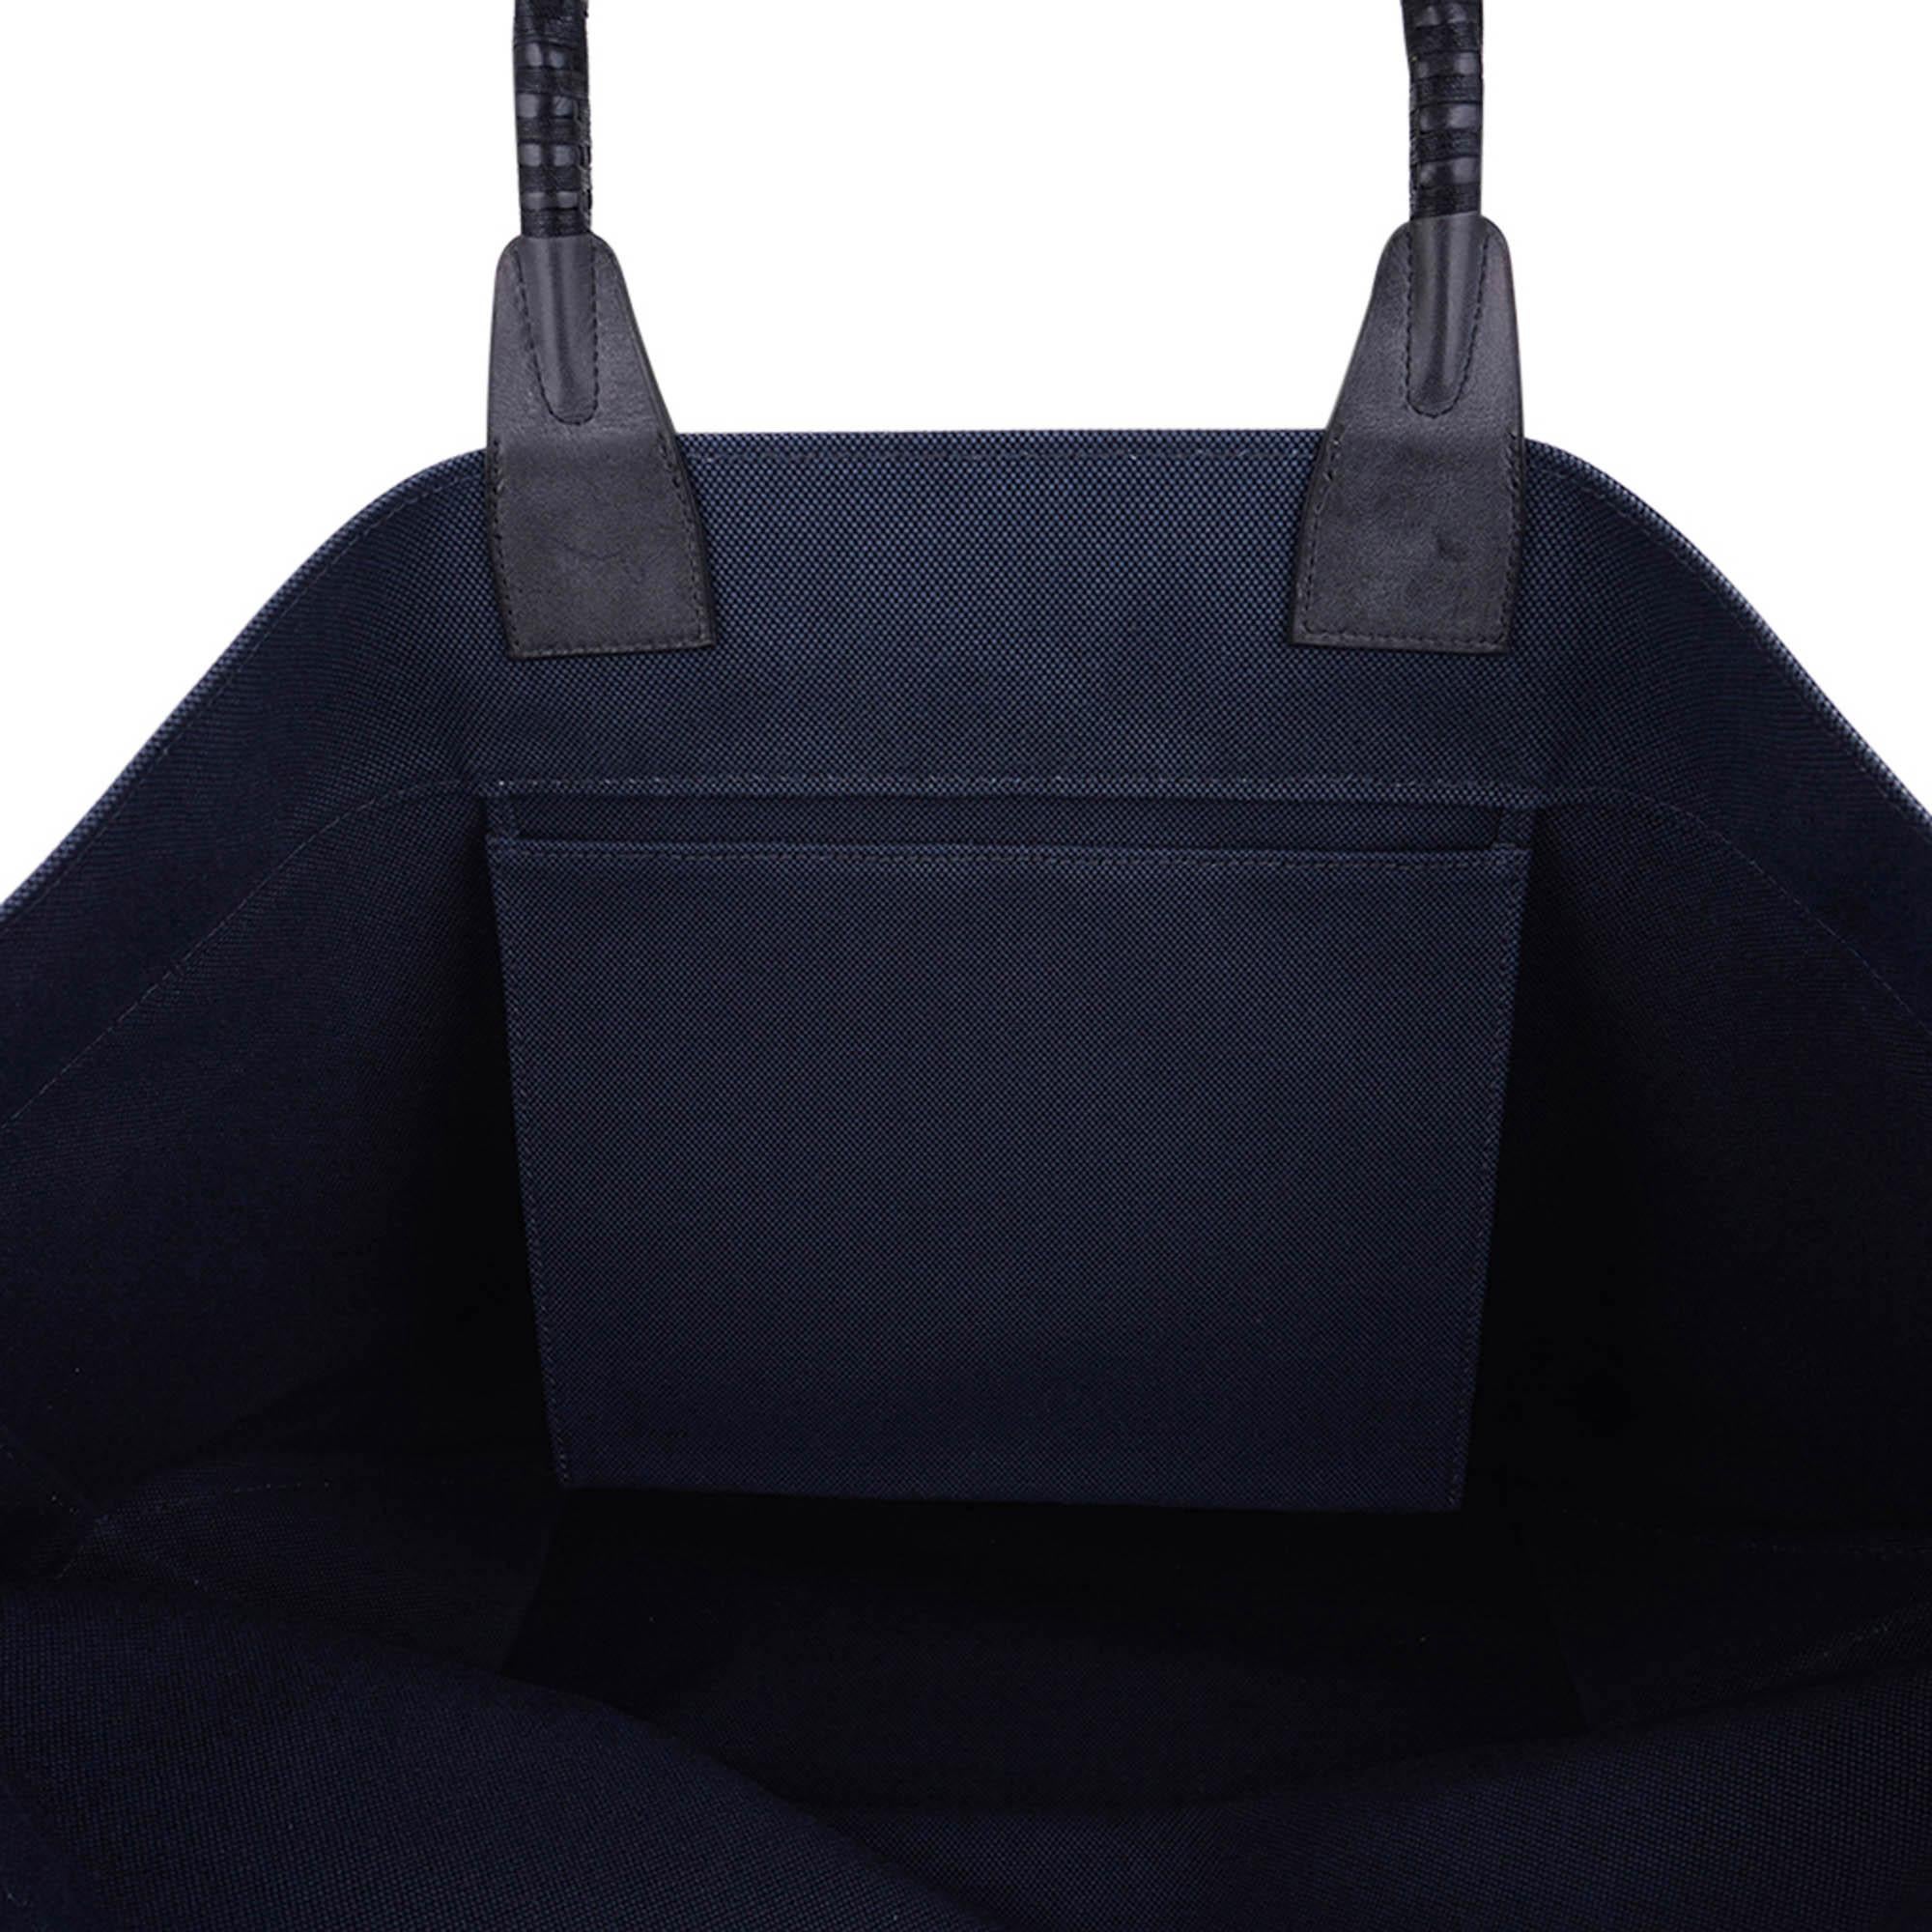 Hermes Steeple Tote Limited Edition Marine Toile Hackberry Wood Leather For Sale 2